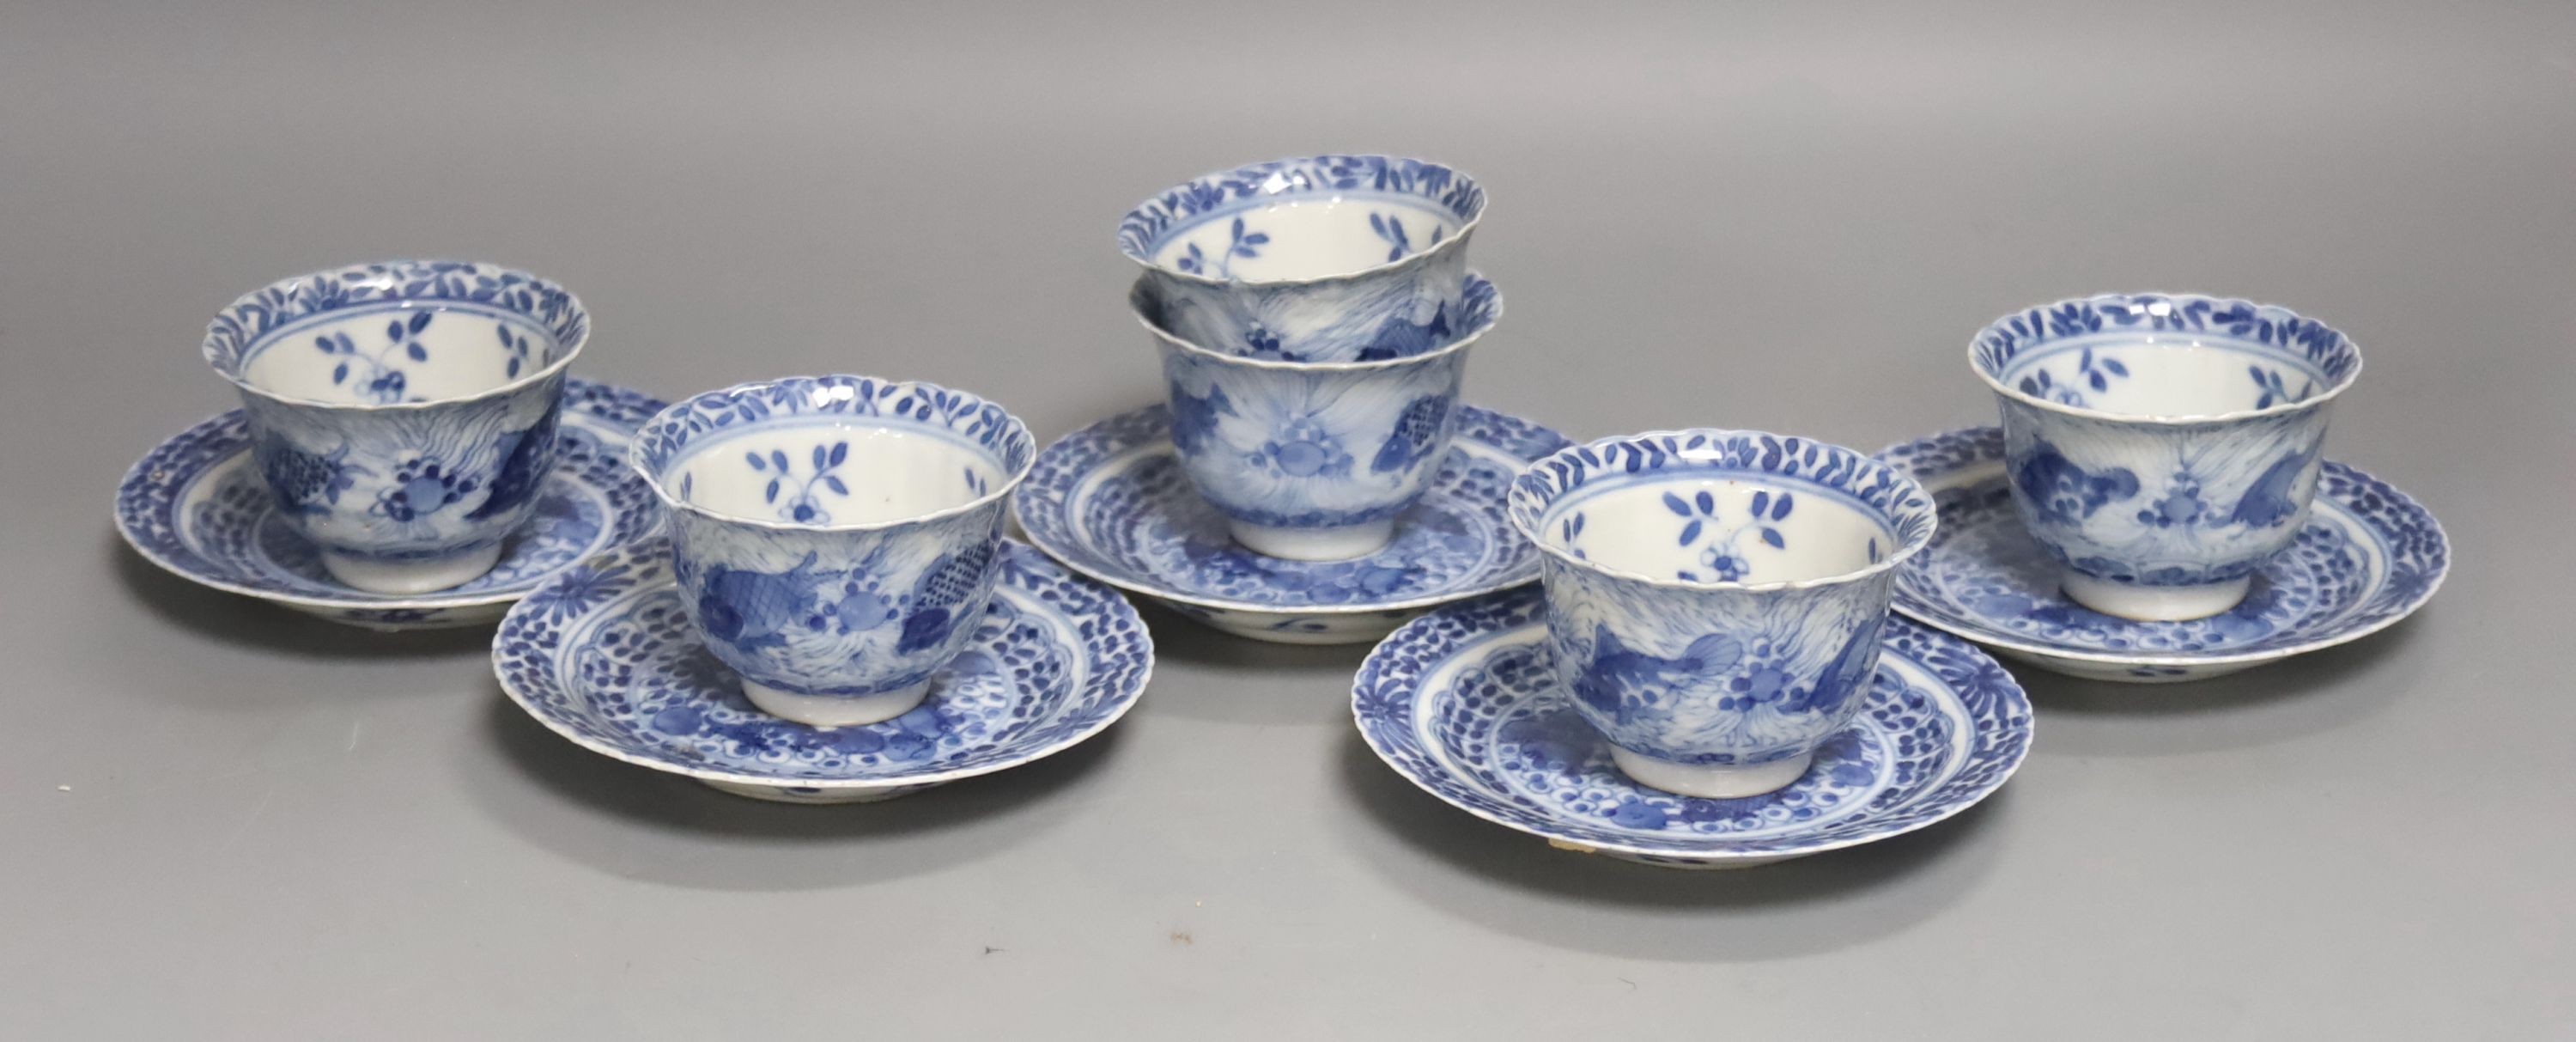 Five 19th century Chinese blue and white tea bowls and saucers, four-character marks to bases